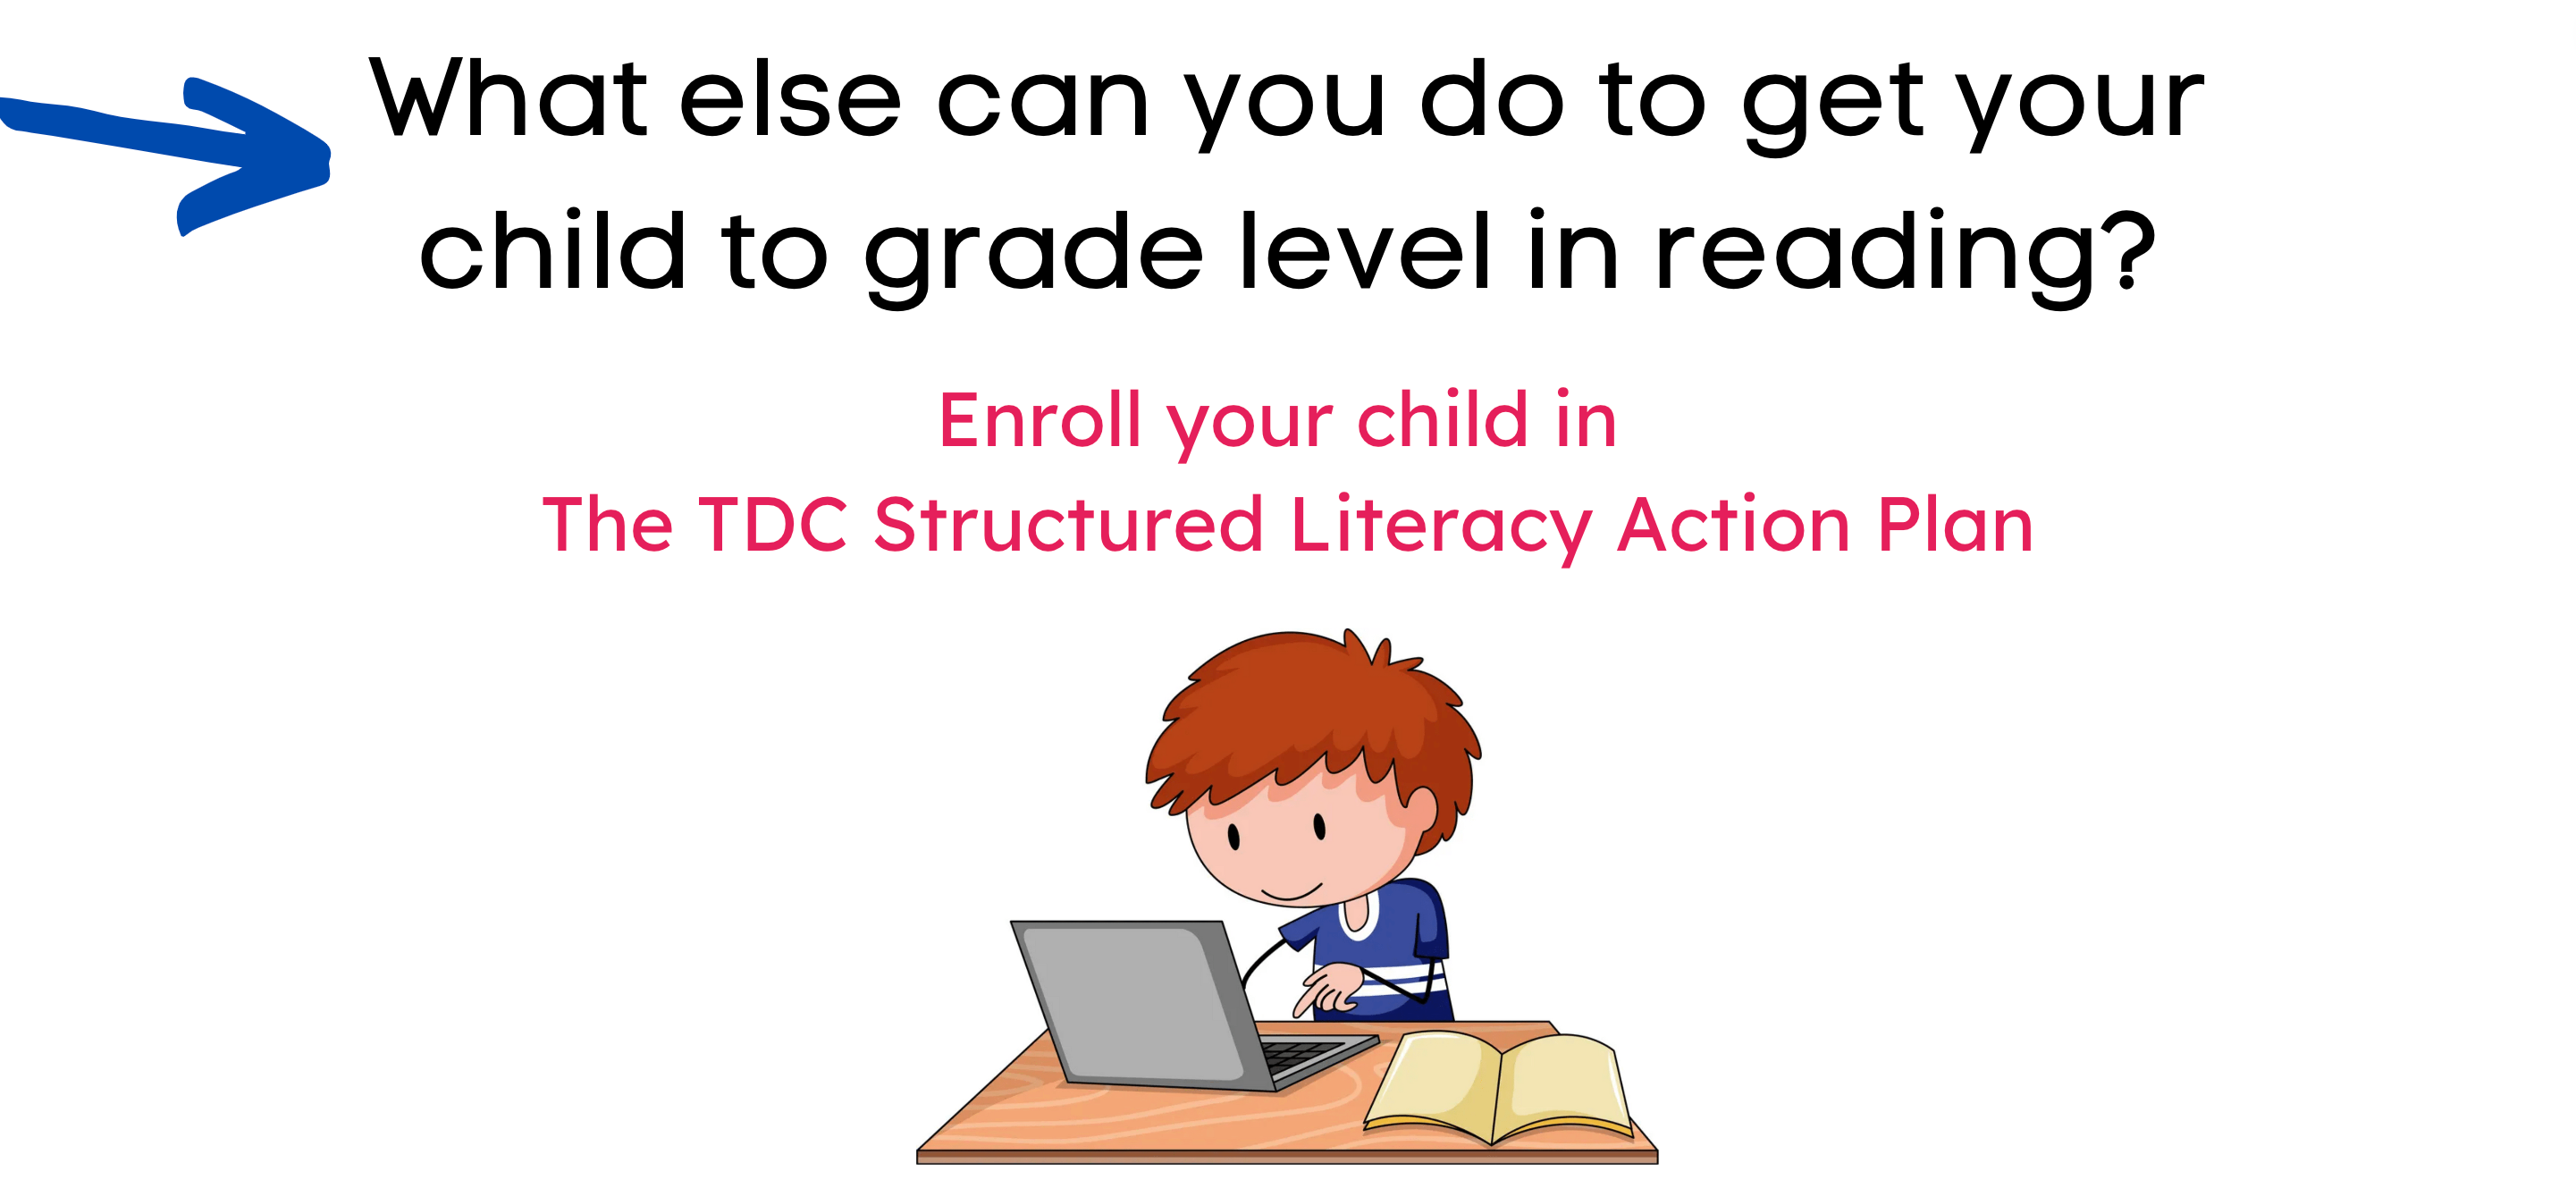 Get your child to grade level in reading!